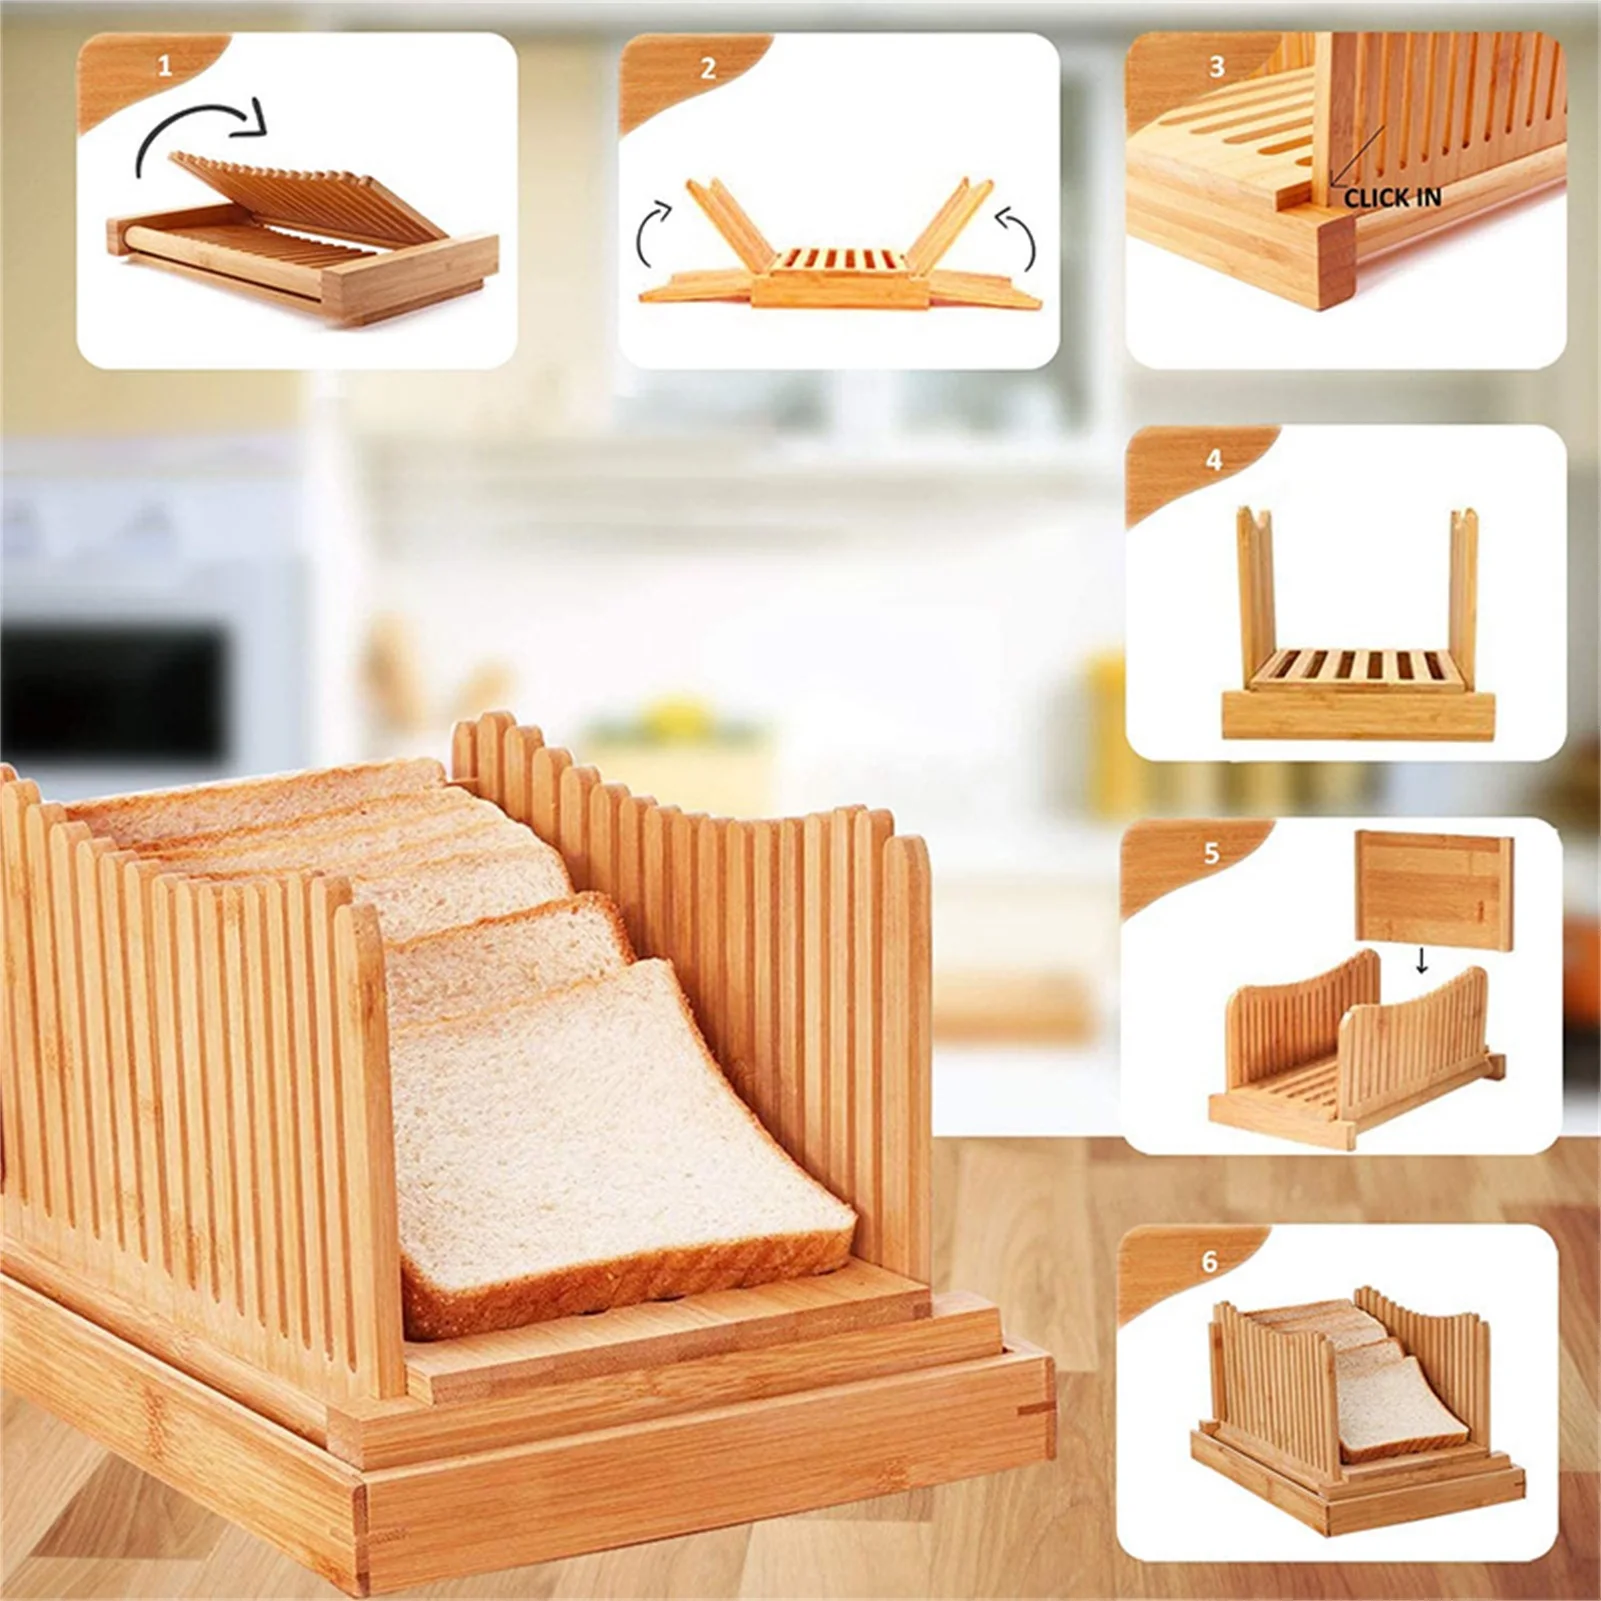 Bamboo Bread Slicer Cutting Guide Wood Bread Cutter For Homemade Bread  Cakes Foldable Bread Cutte With Crumbs Tray - AliExpress